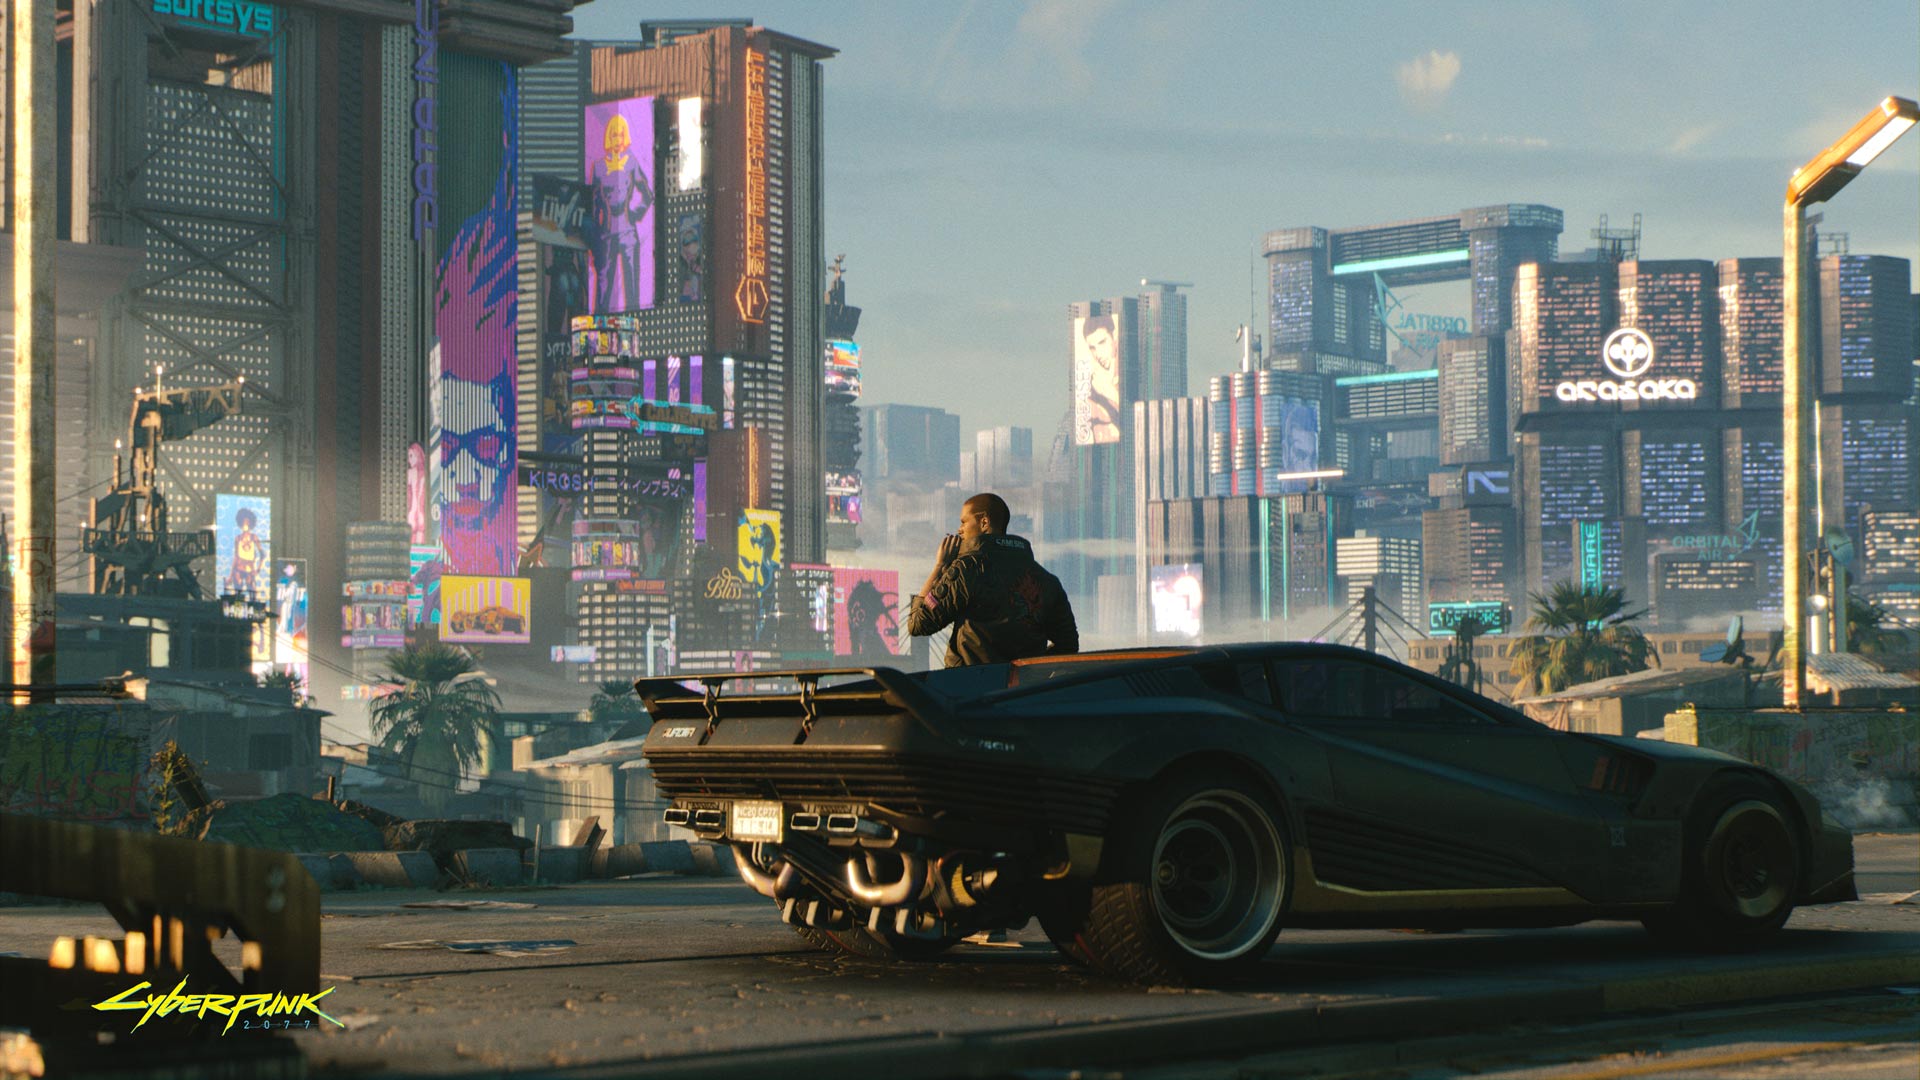 As Cyberpunk 2077 Development Intensifies, CD Projekt Red Pledges To Be ‘More Humane’ To Its Workers